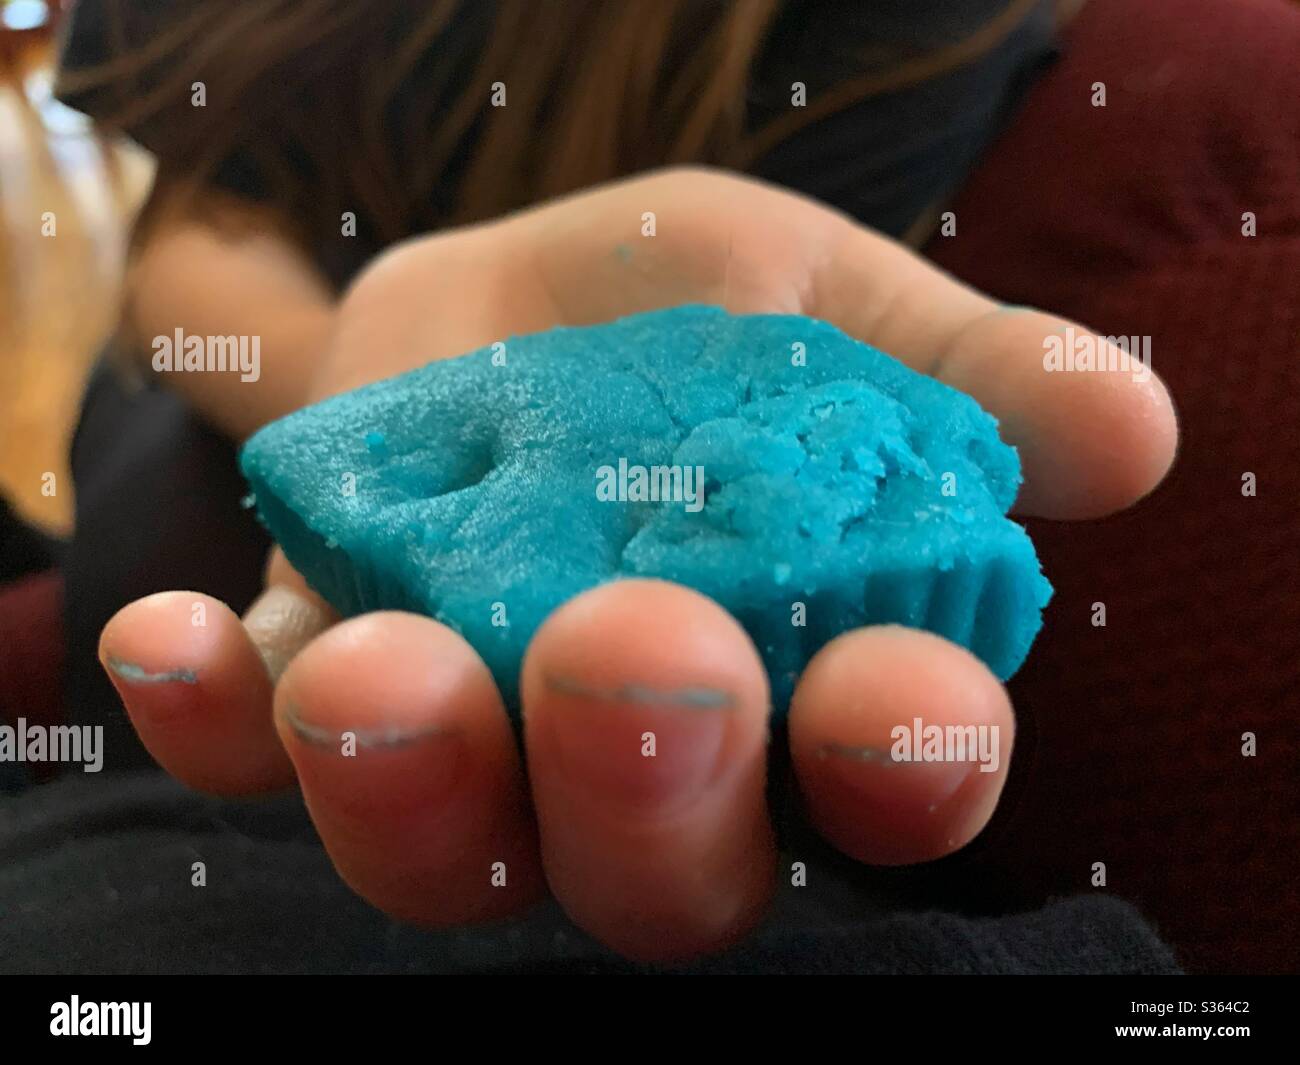 Closeup of a child’s hand holding a bunch of blue homemade play dough. Stock Photo